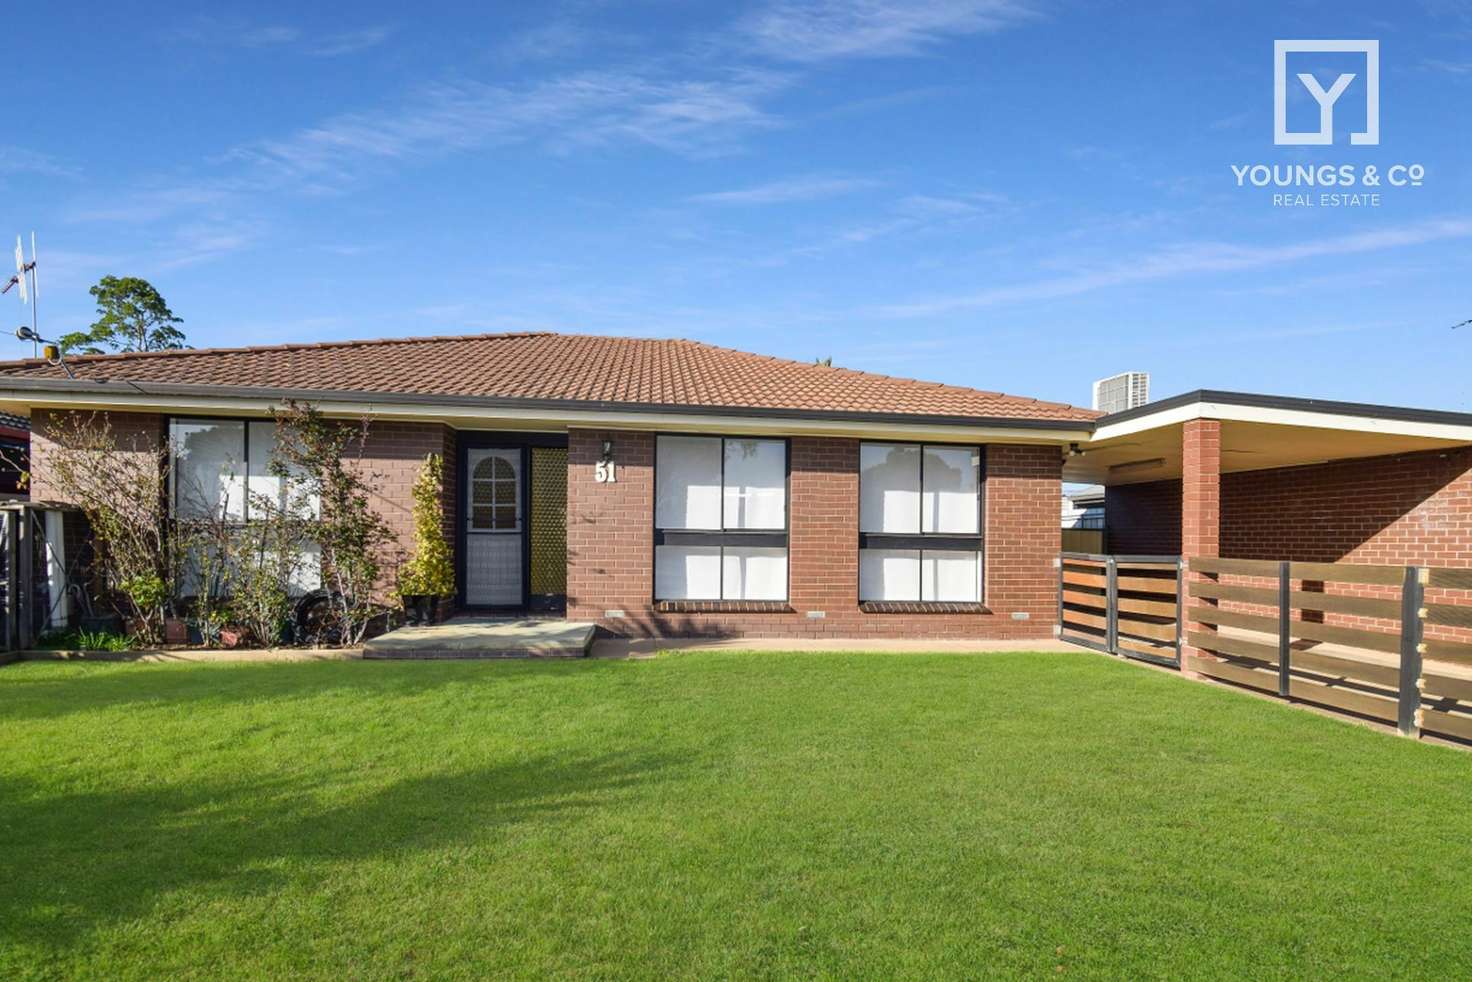 Main view of Homely house listing, 51 Lenne St, Mooroopna VIC 3629